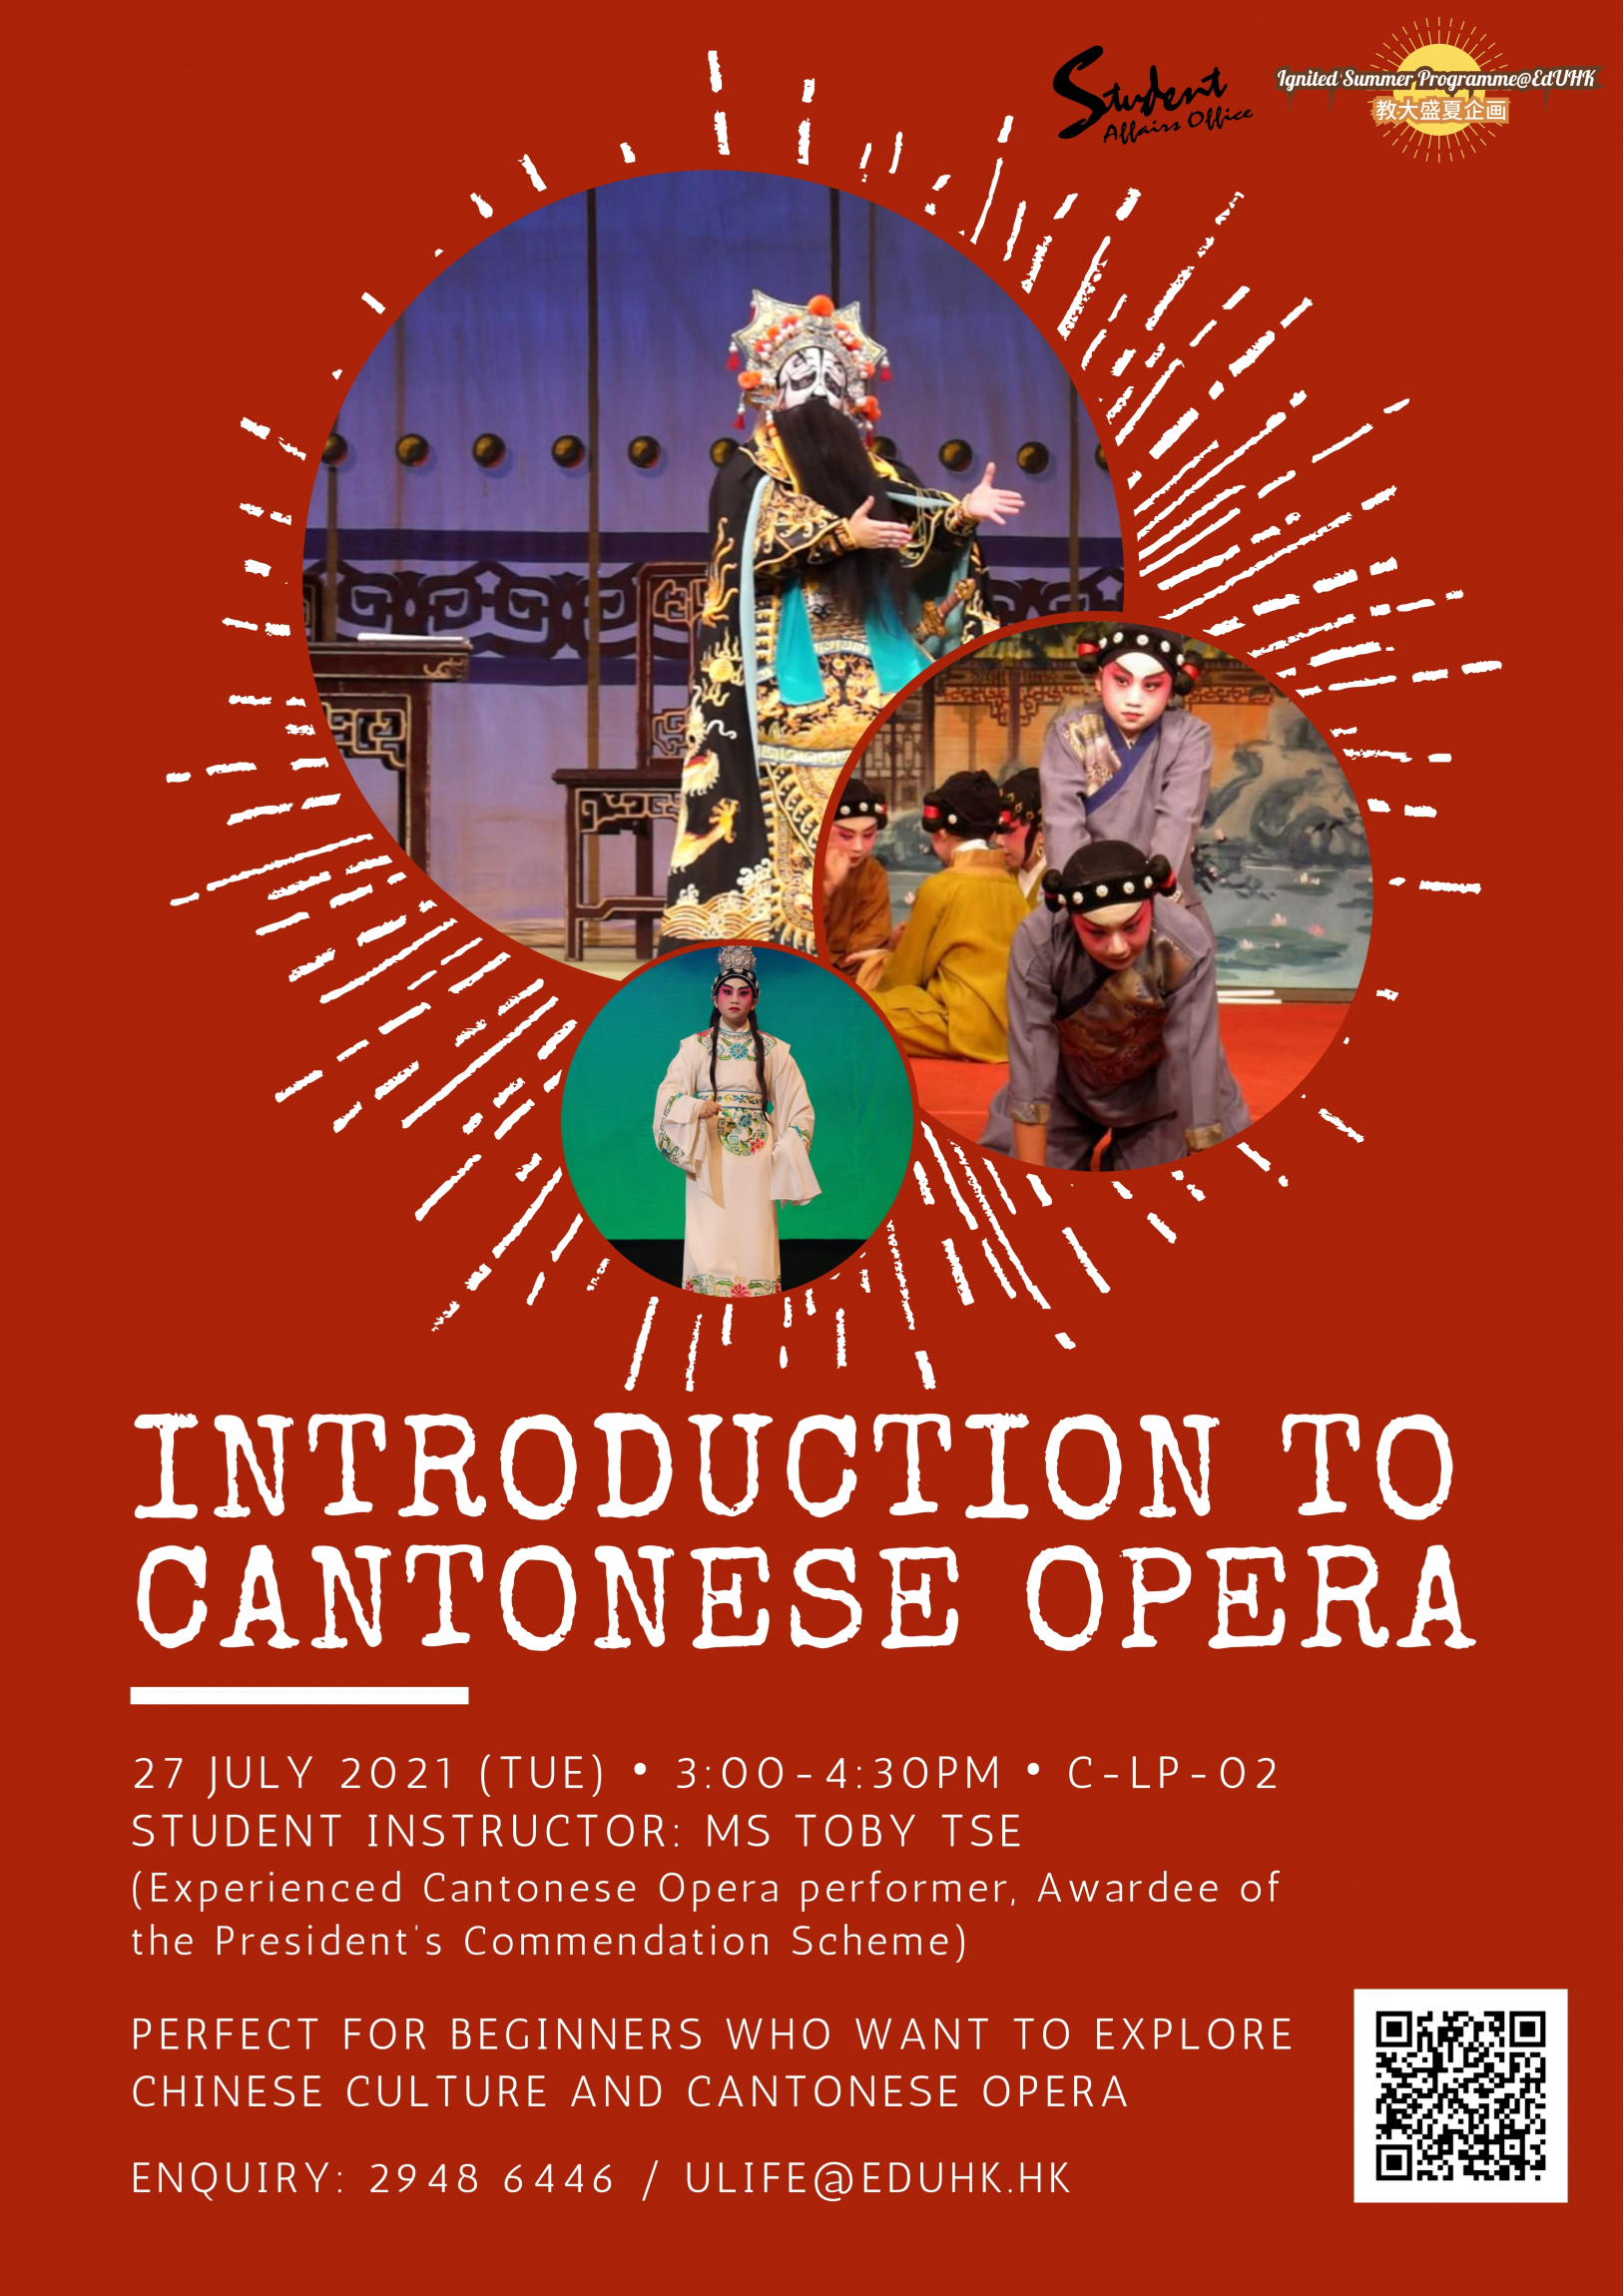 Public Photos / Files - Introduction to Cantonese Opera